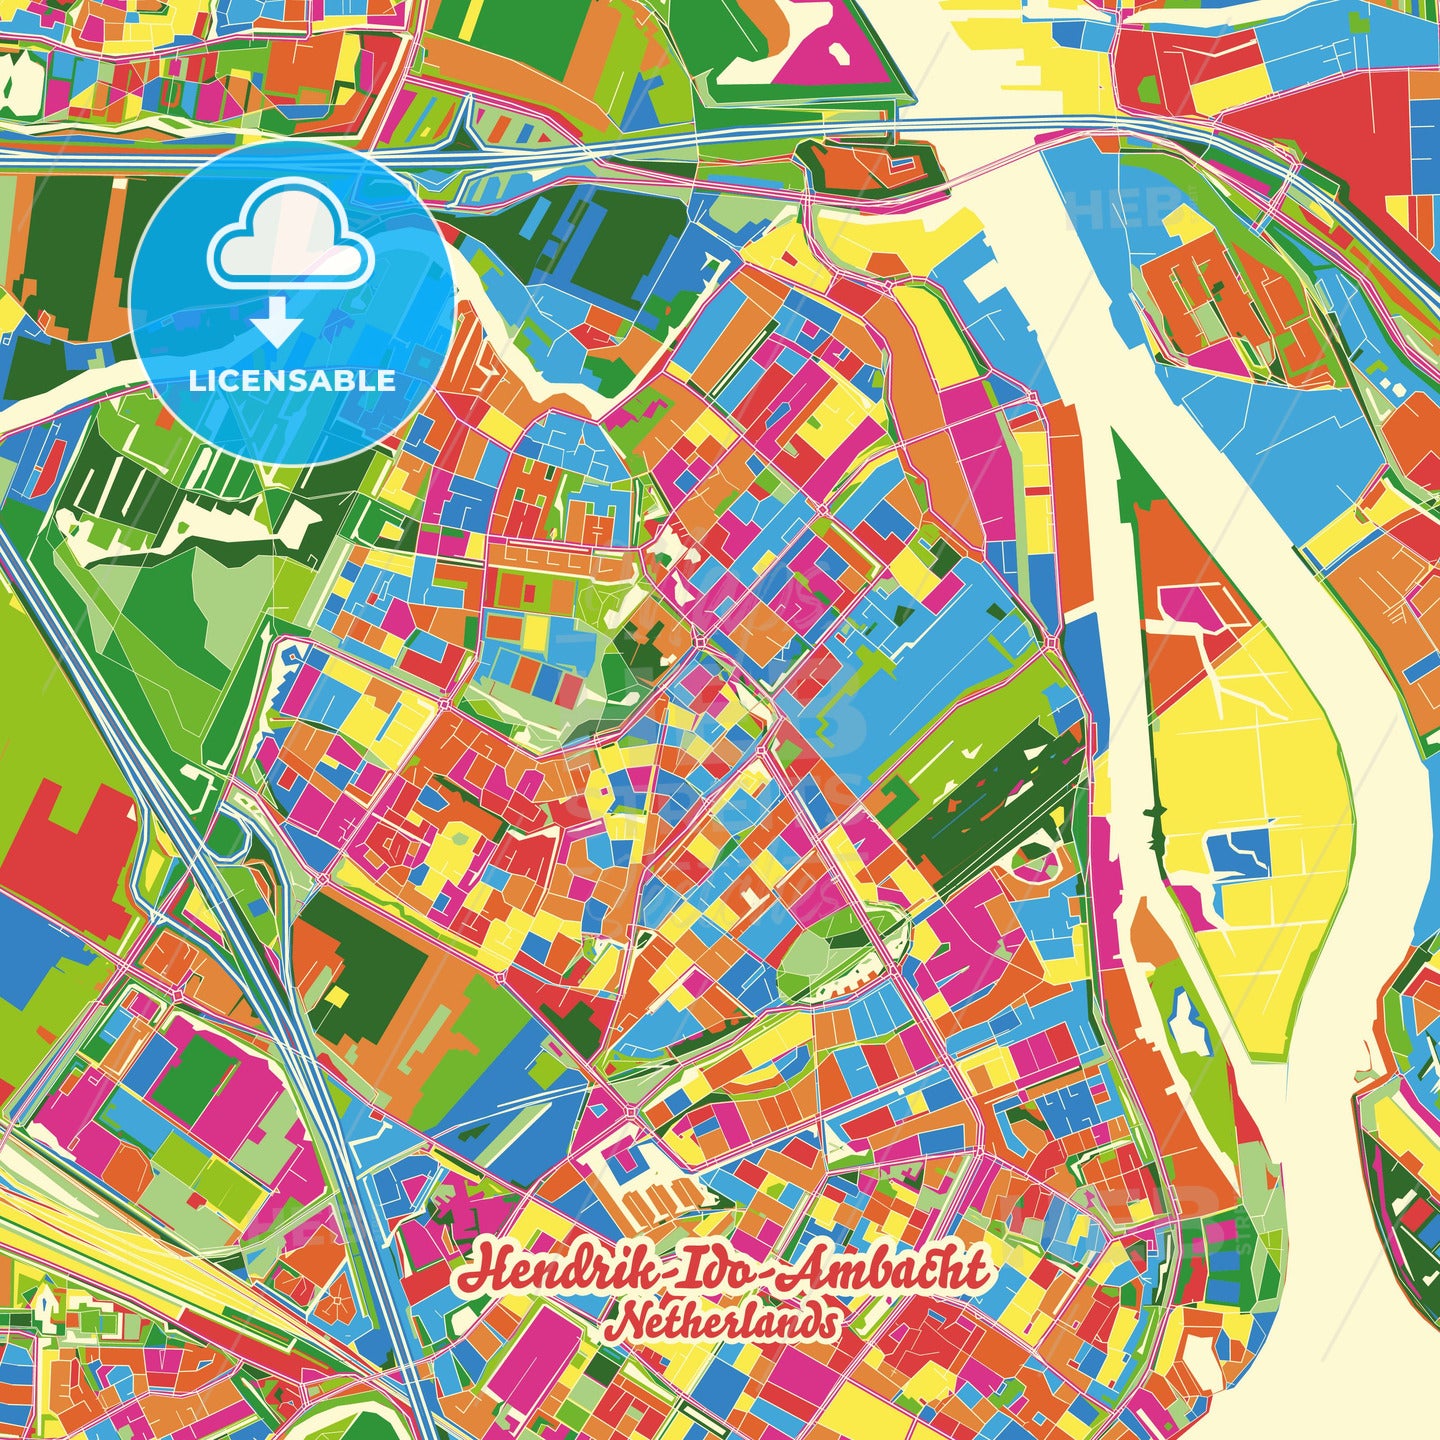 Hendrik-Ido-Ambacht, Netherlands Crazy Colorful Street Map Poster Template - HEBSTREITS Sketches